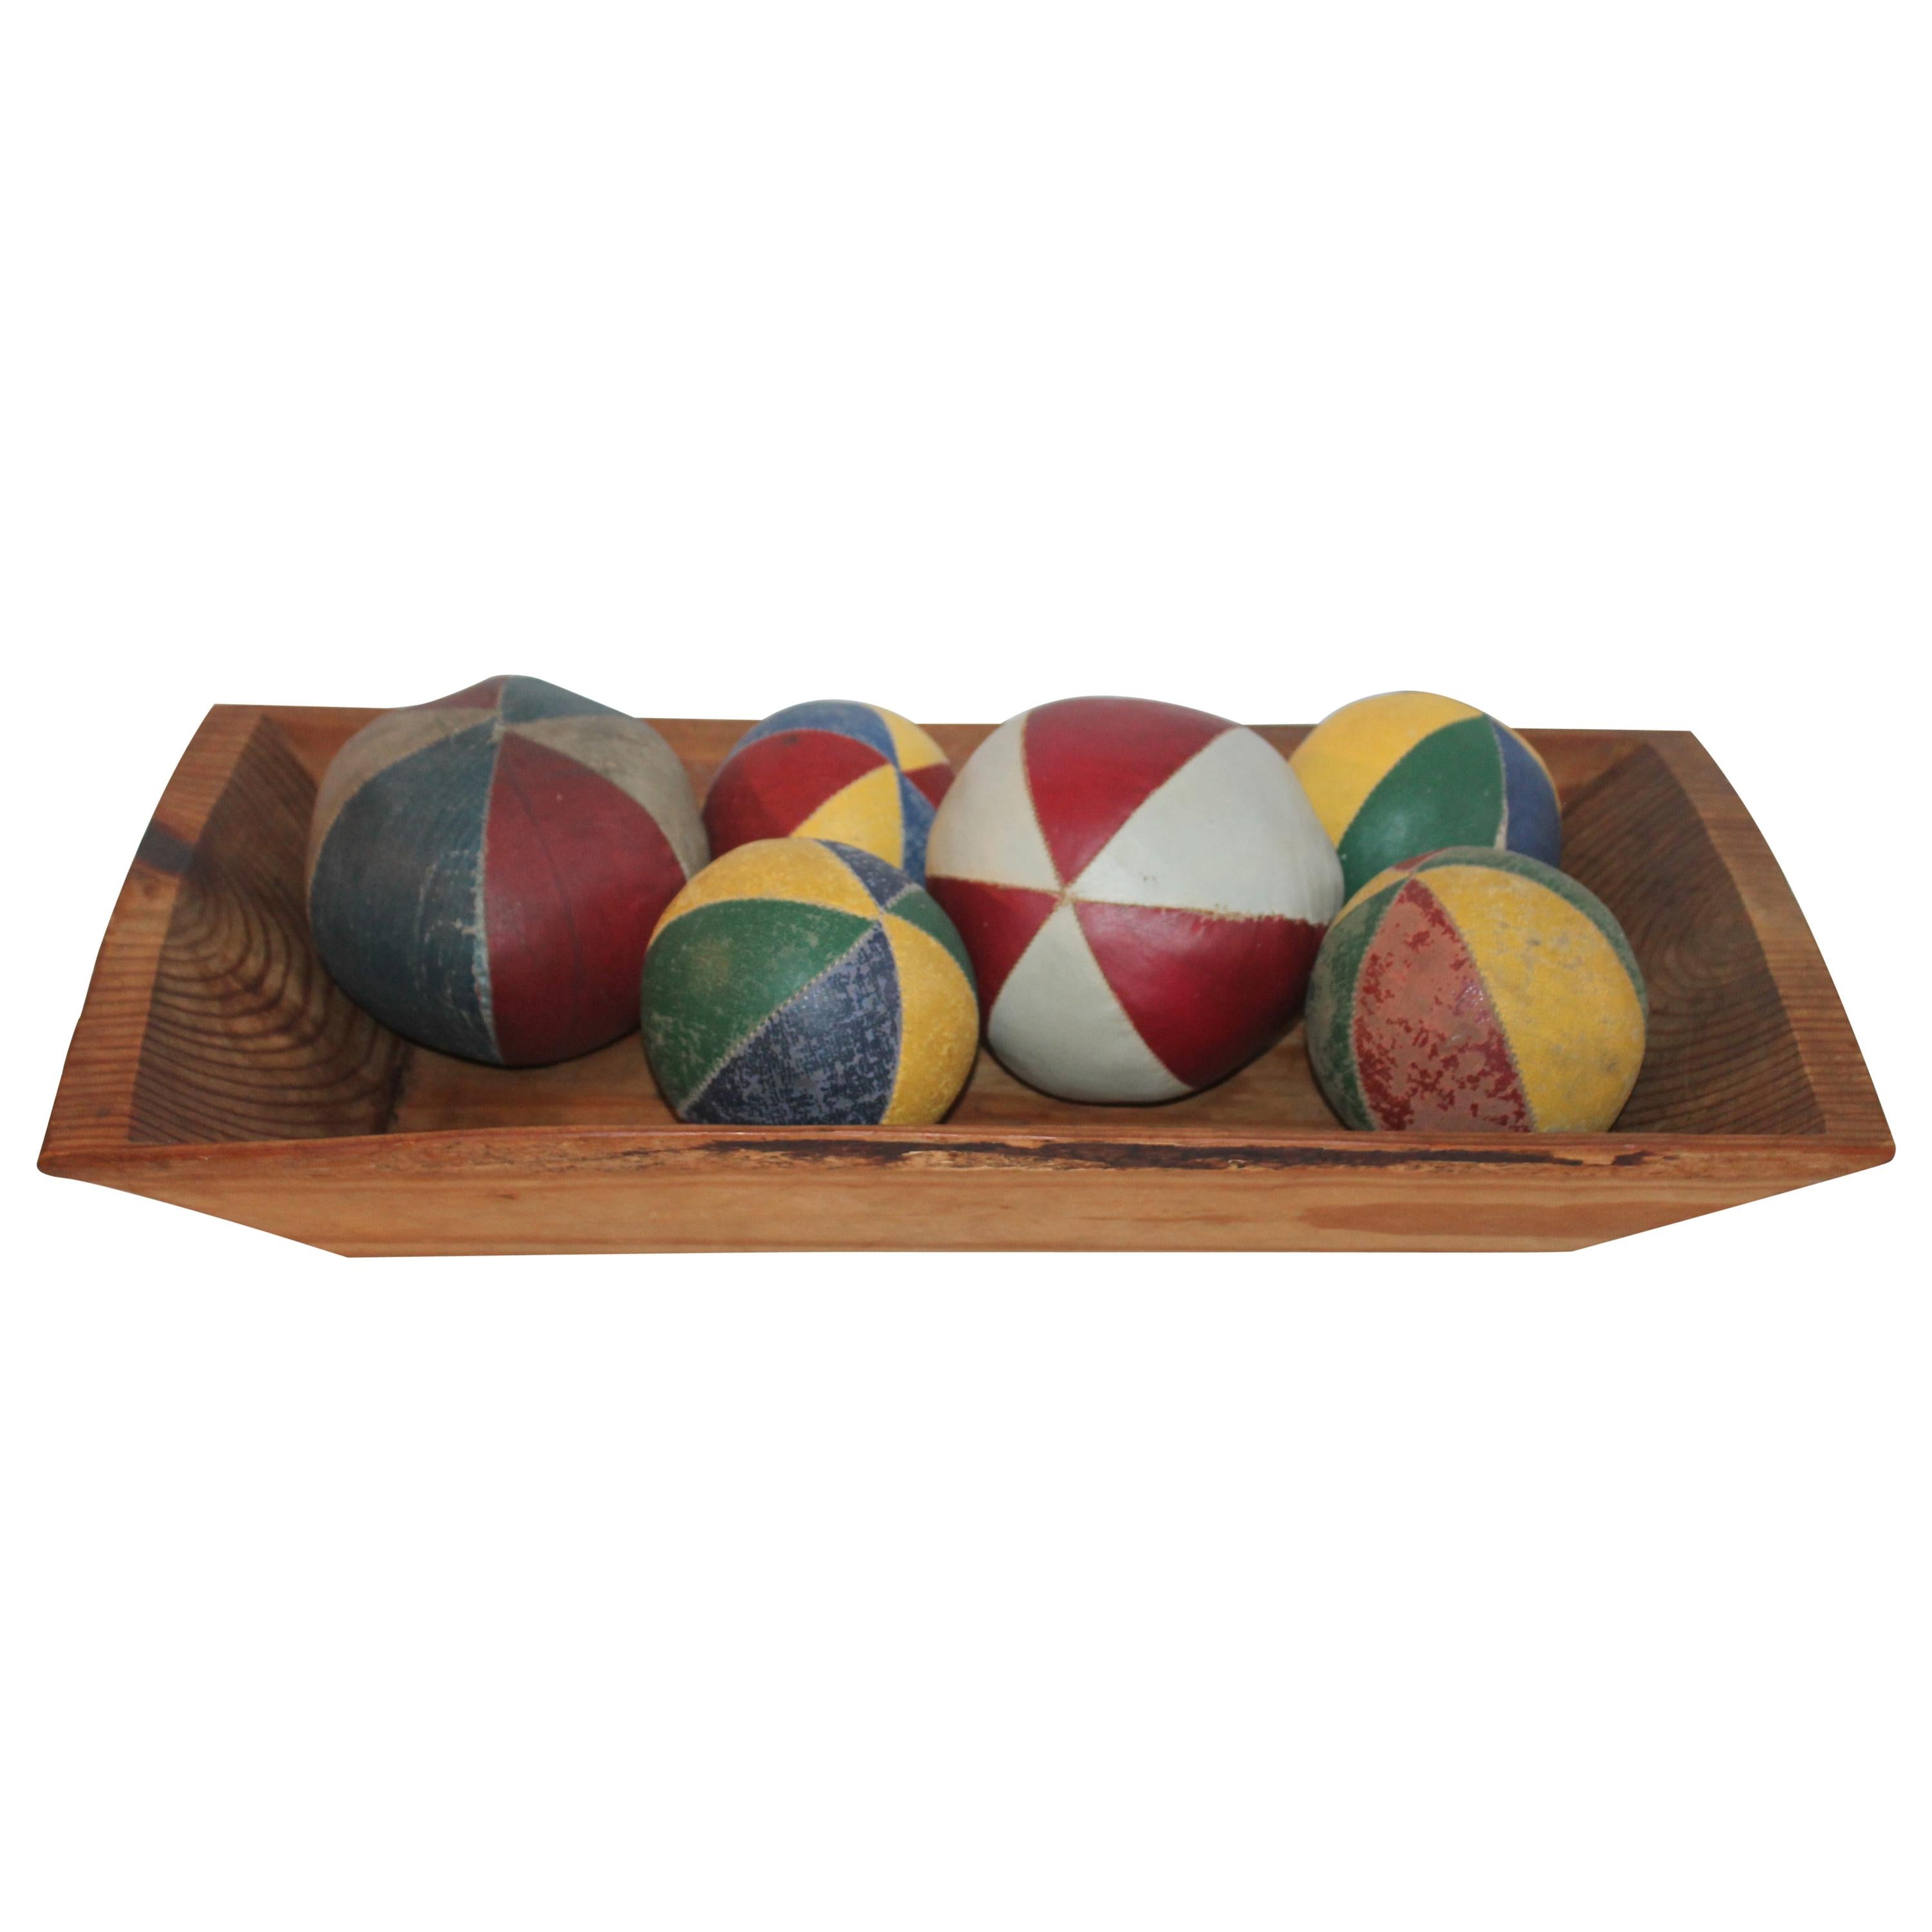 19th Century Oil Cloth Juggling or Carnival Balls Collection / 6 Pieces